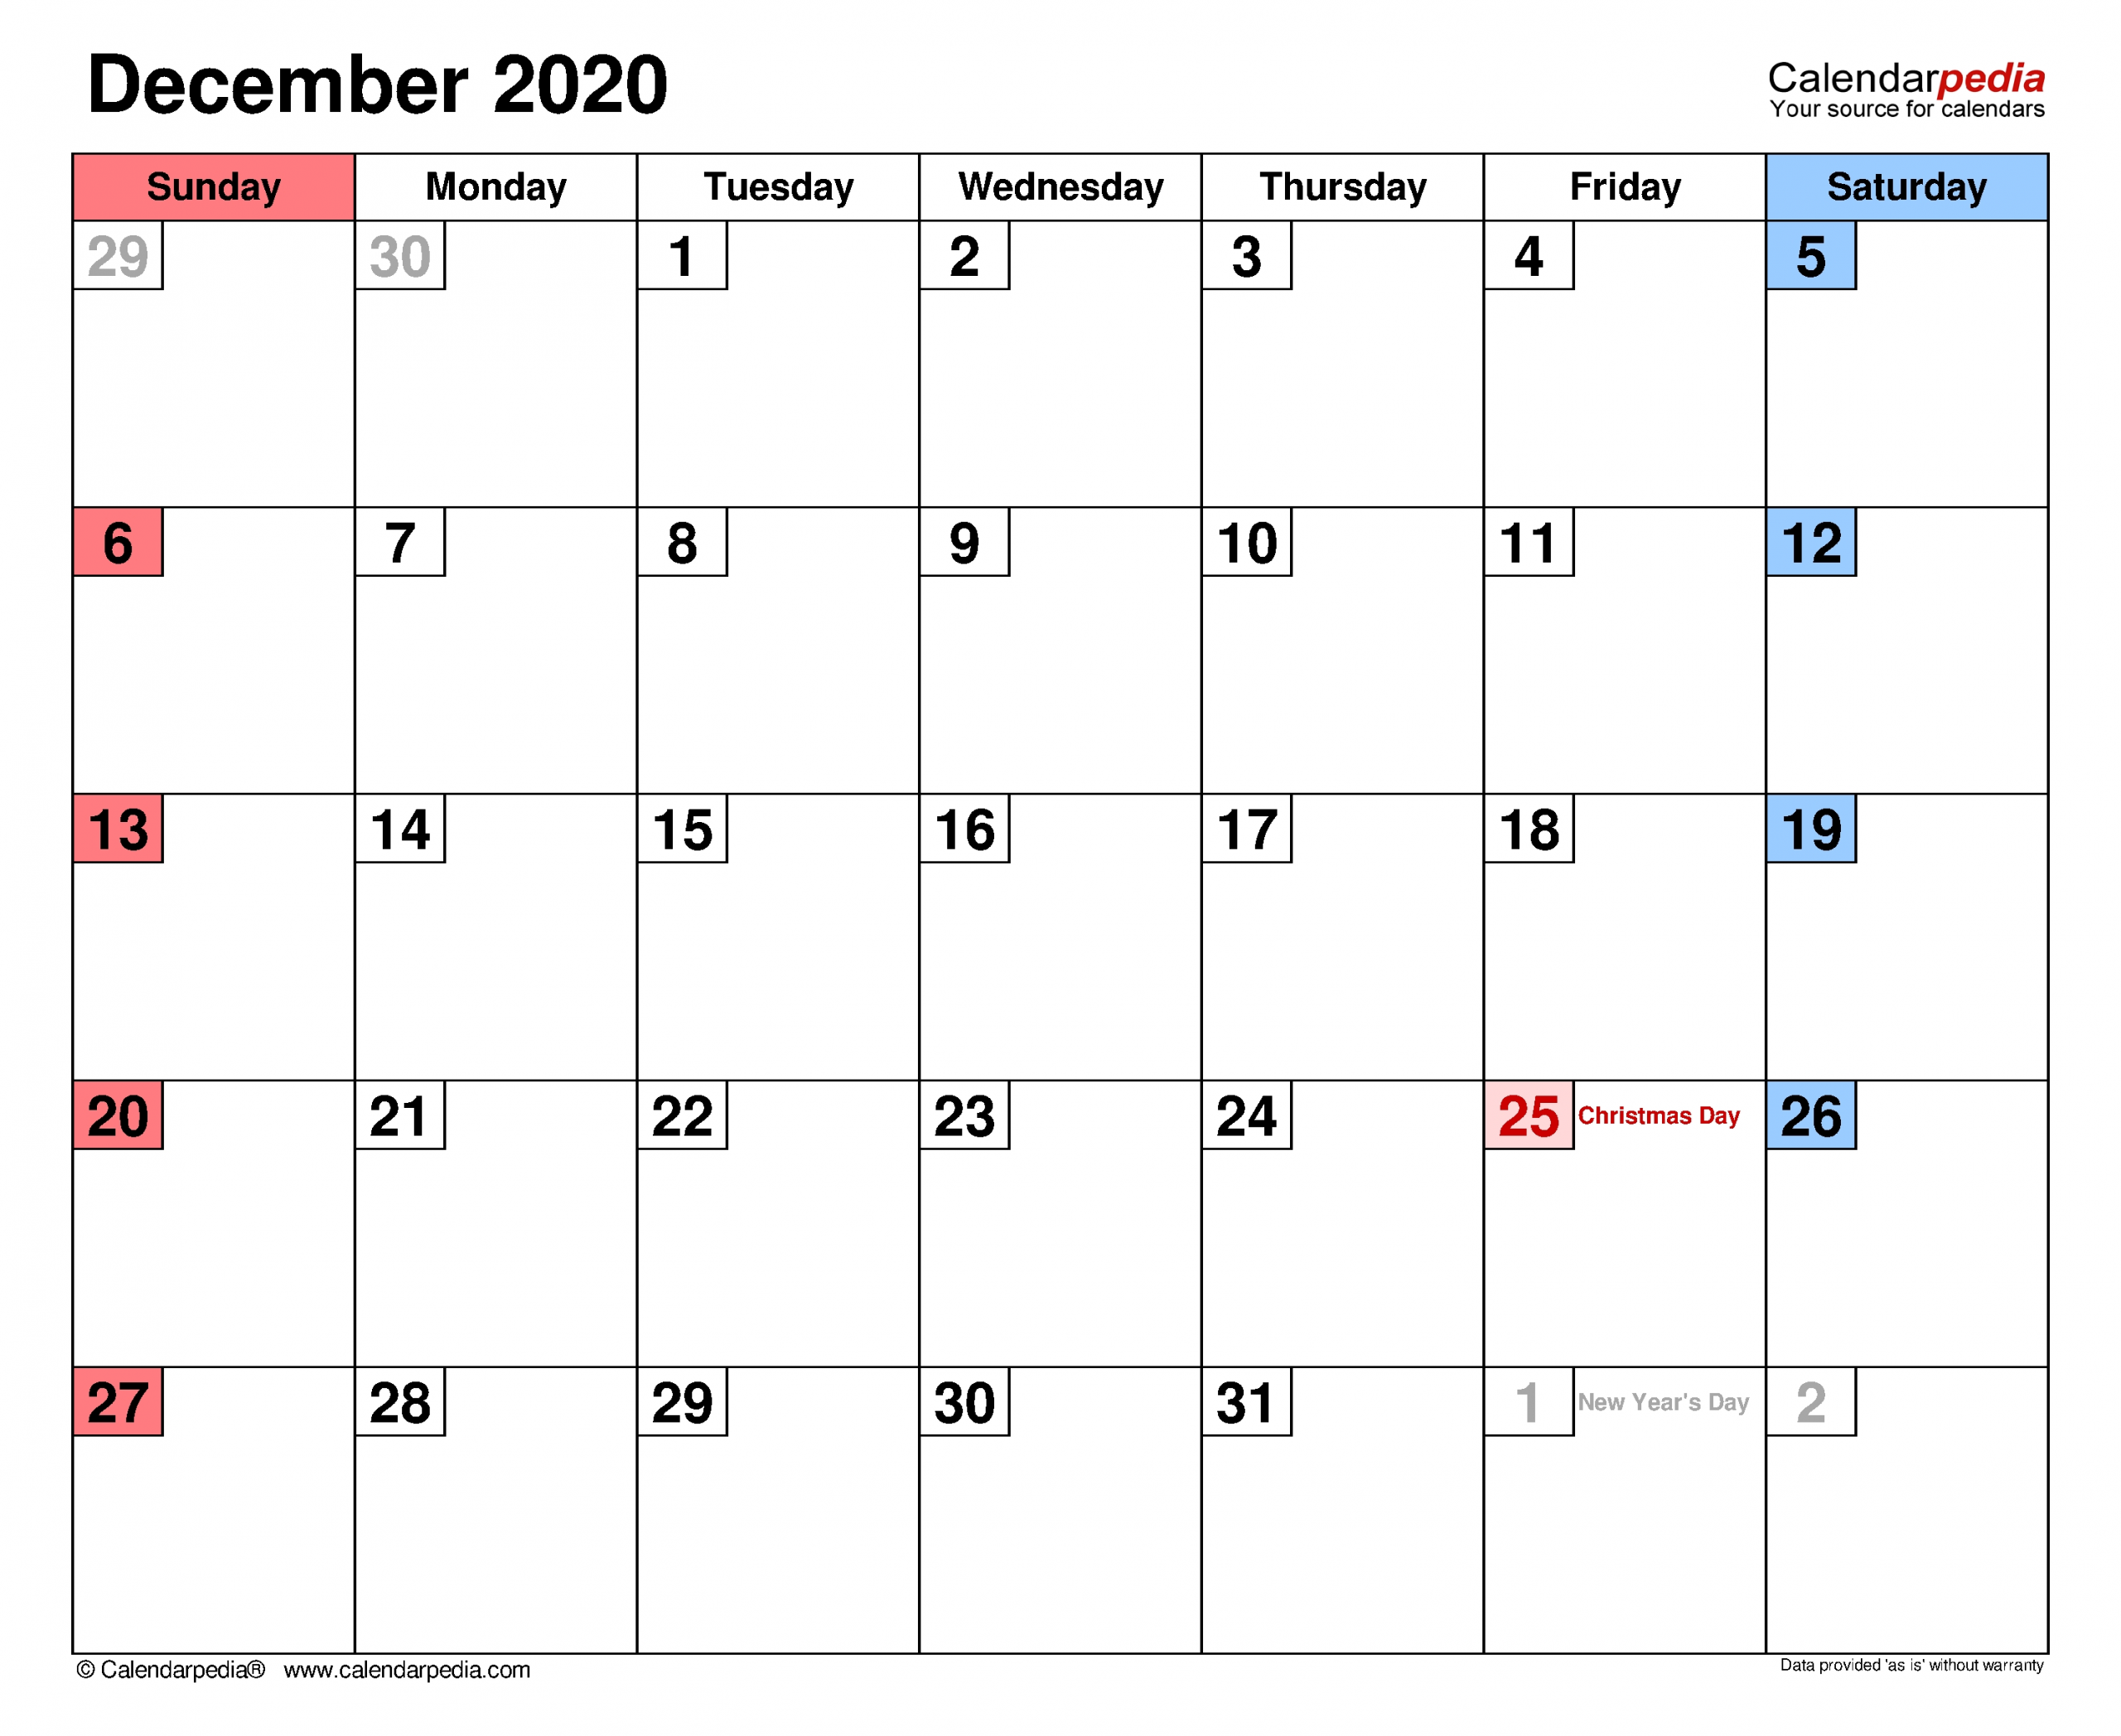 December 2020 Calendar | Templates For Word, Excel And Pdf